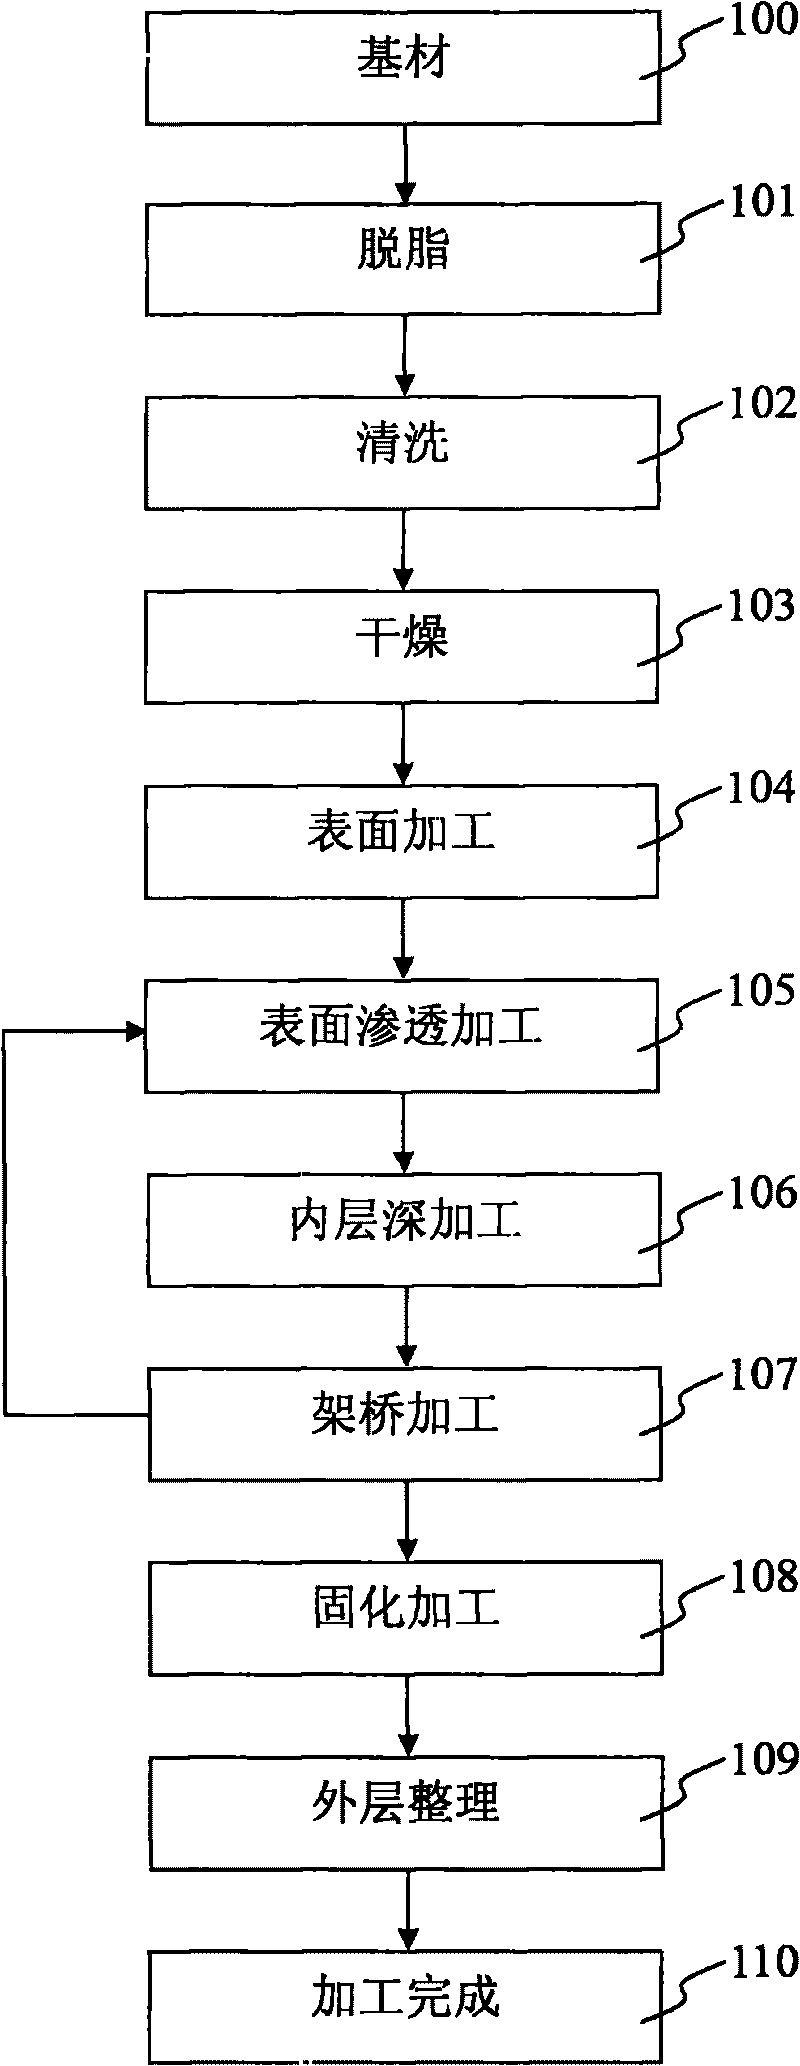 Processing method for surface coating